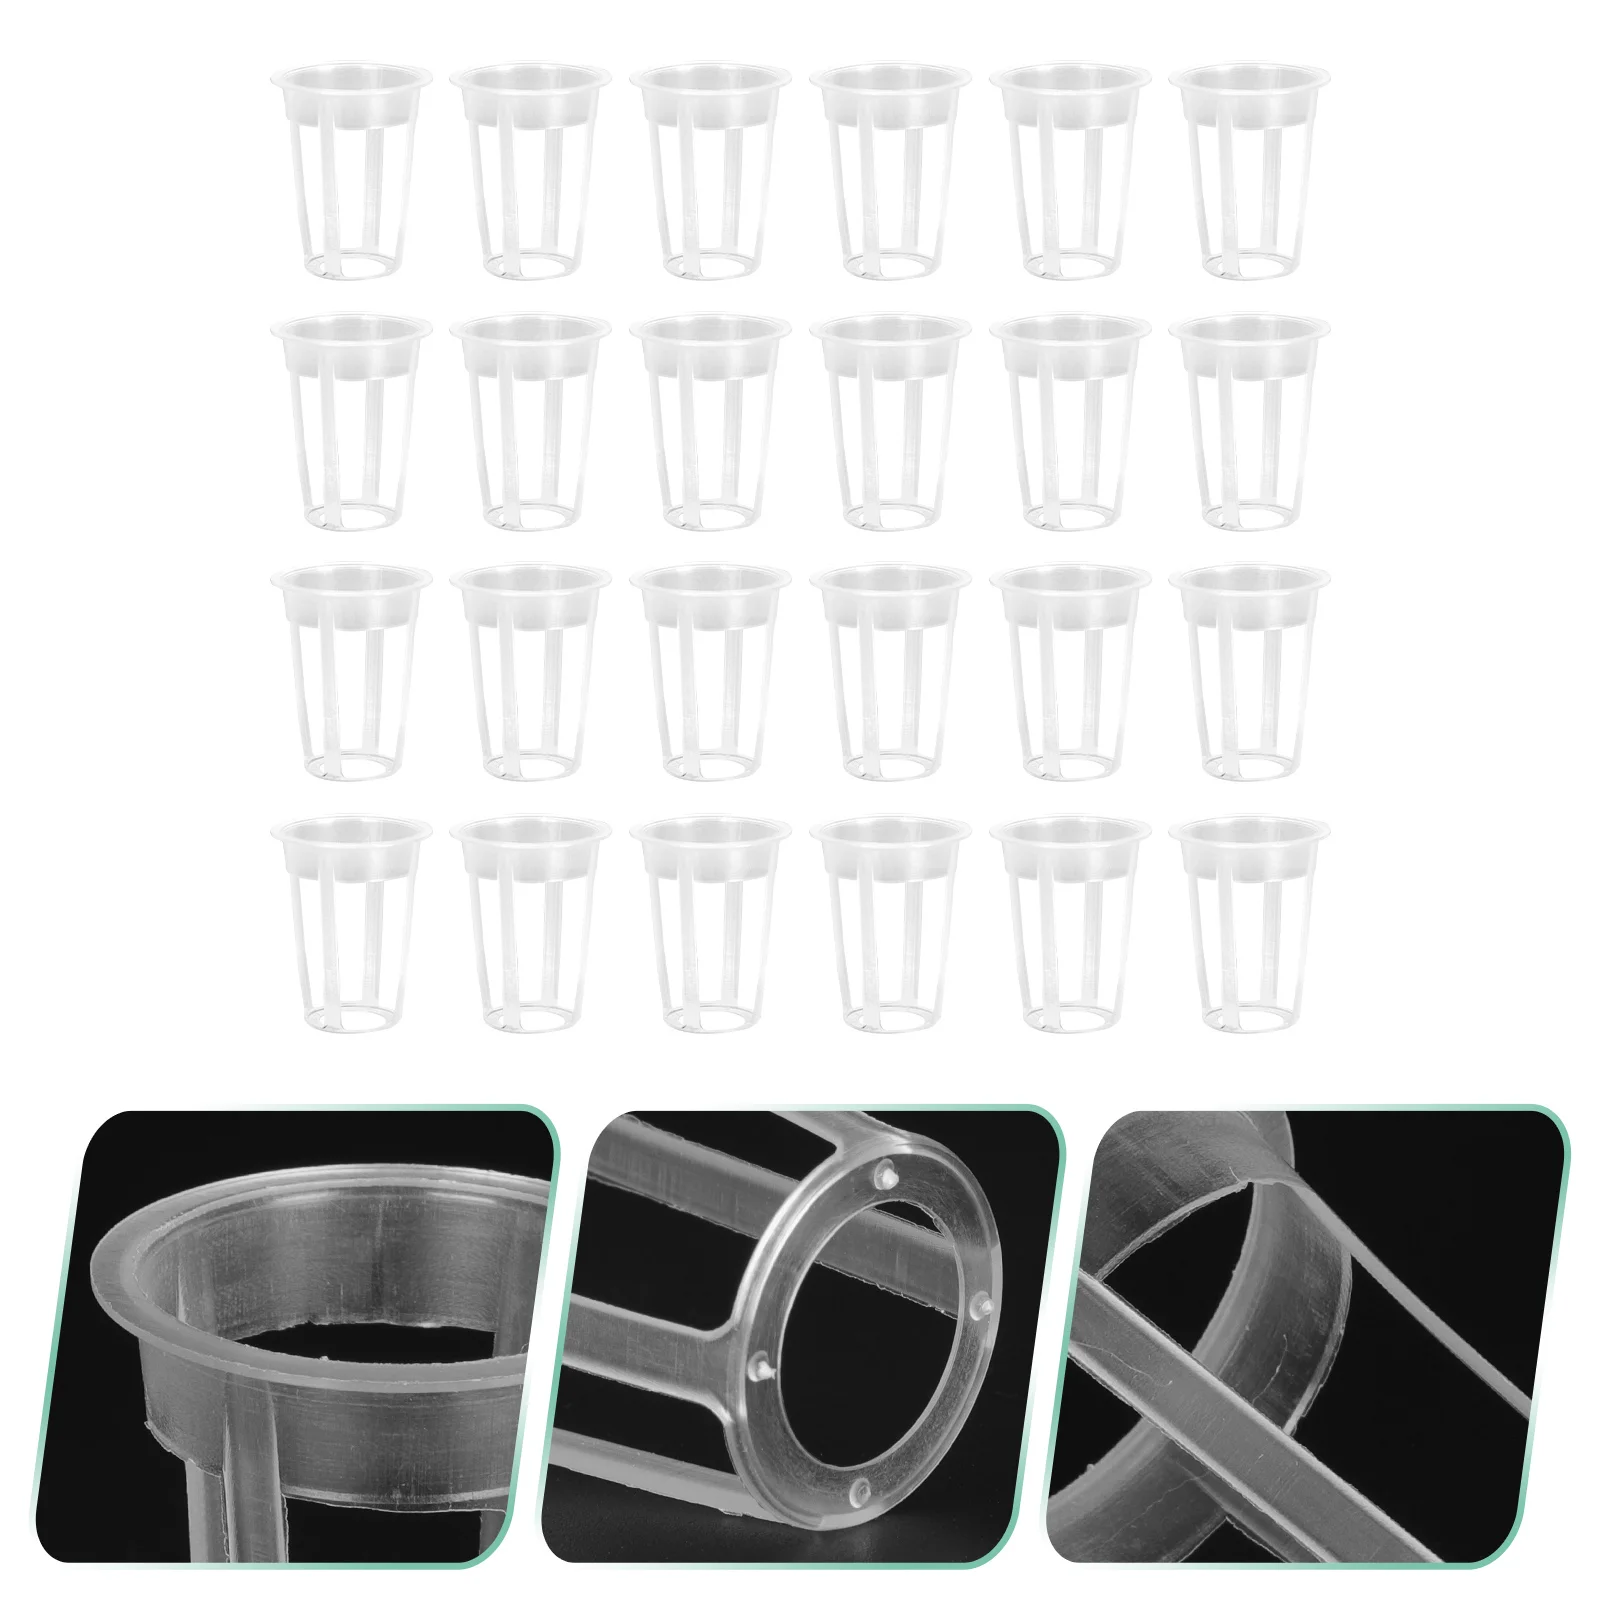 

100 Pcs Root Control Device Plastic Planting Basket Baskets Growth Pp Growing Cup Garden Supplies Hydroponic Plants